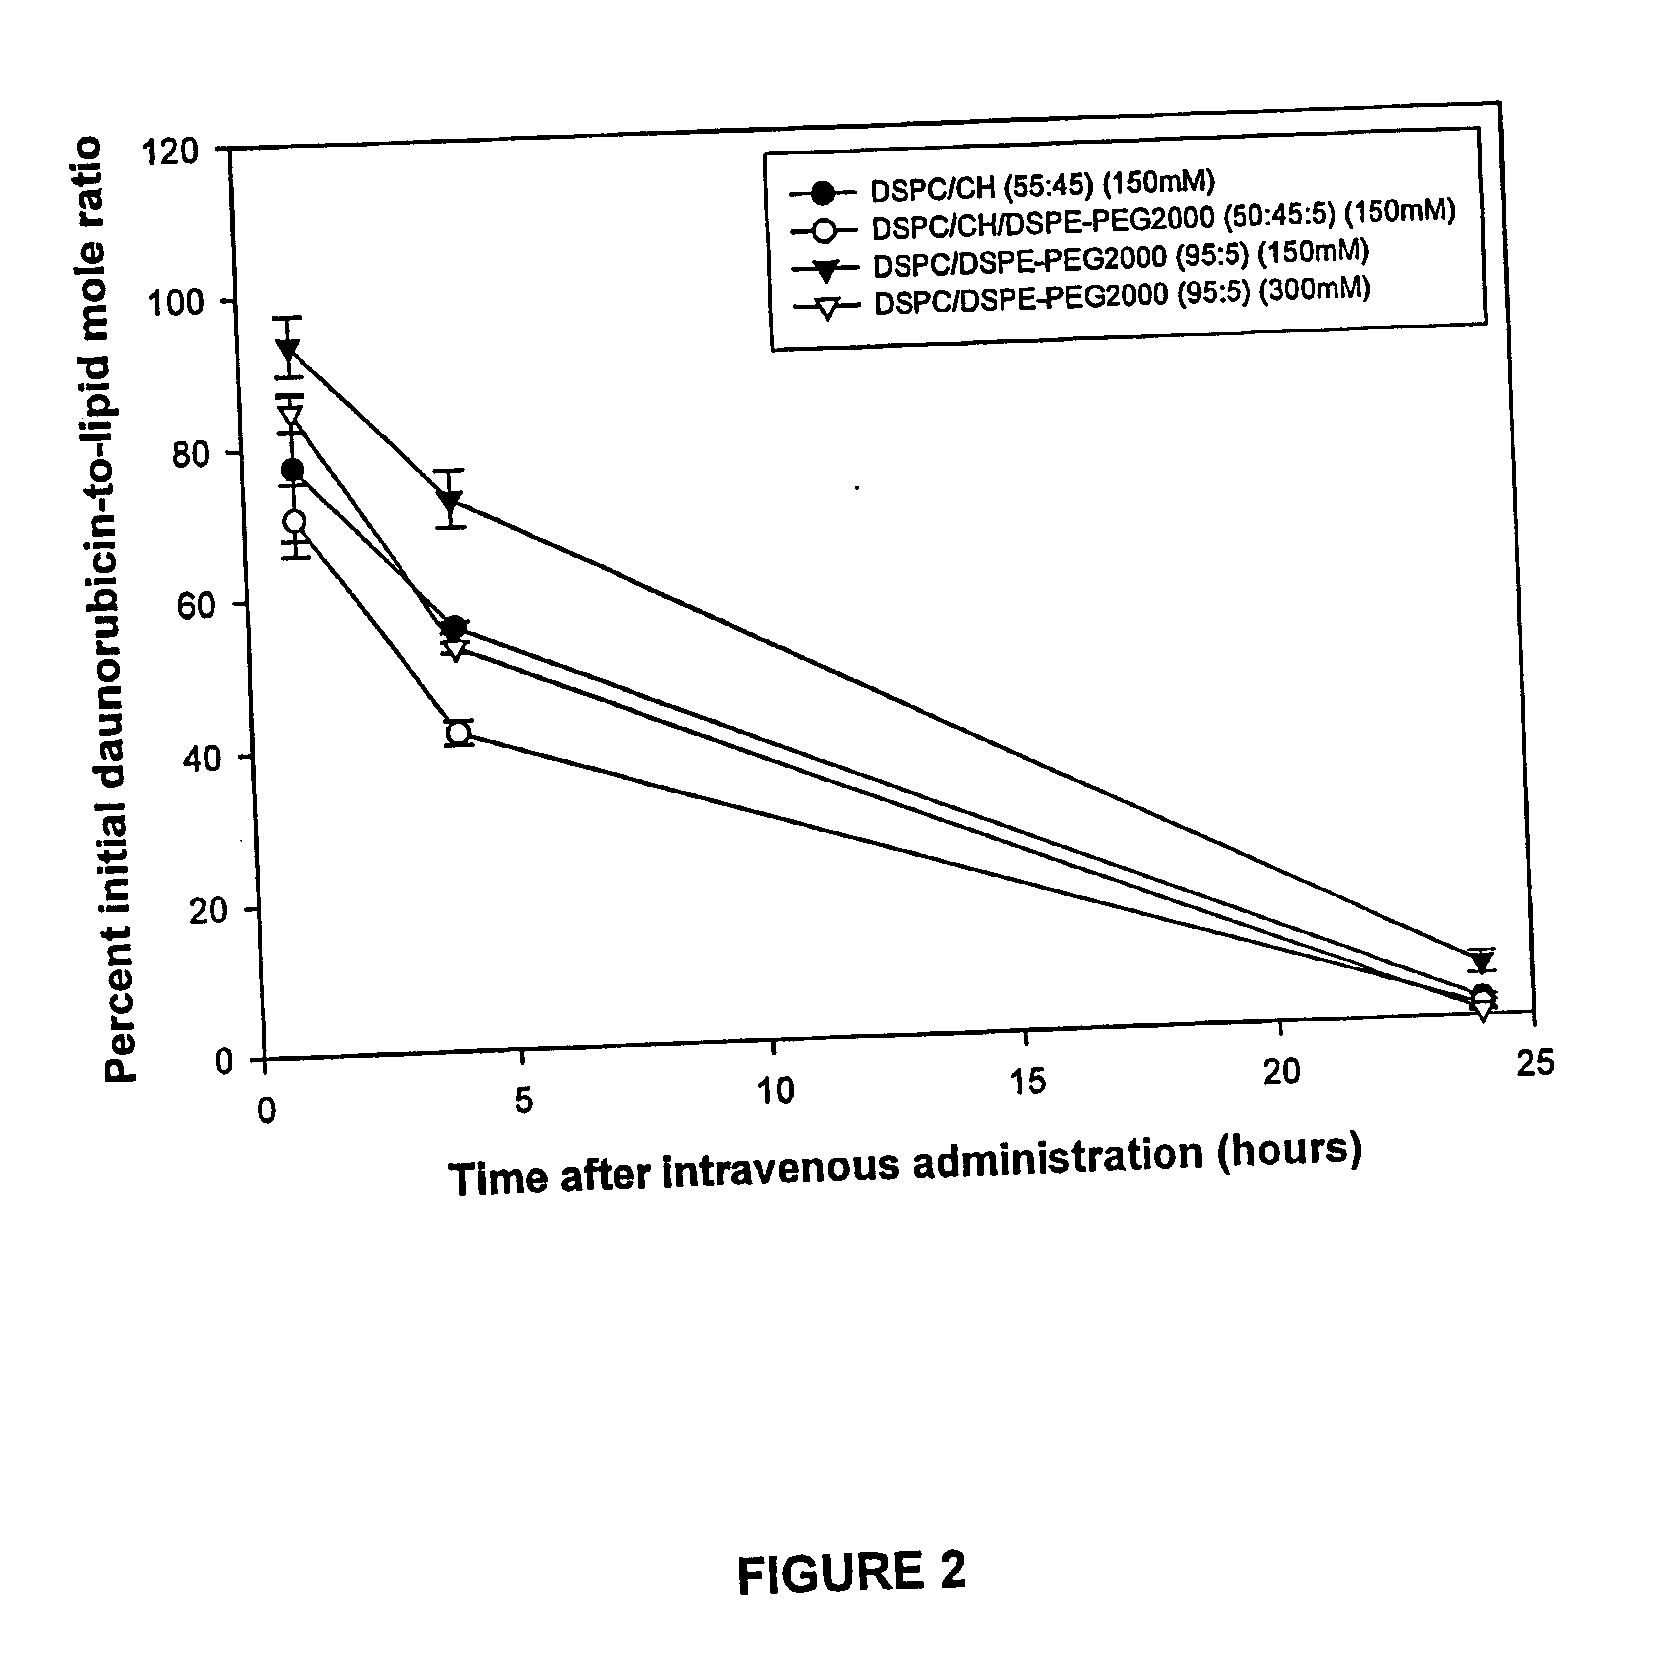 Lipid carrier compositions and methods for improved drug retention